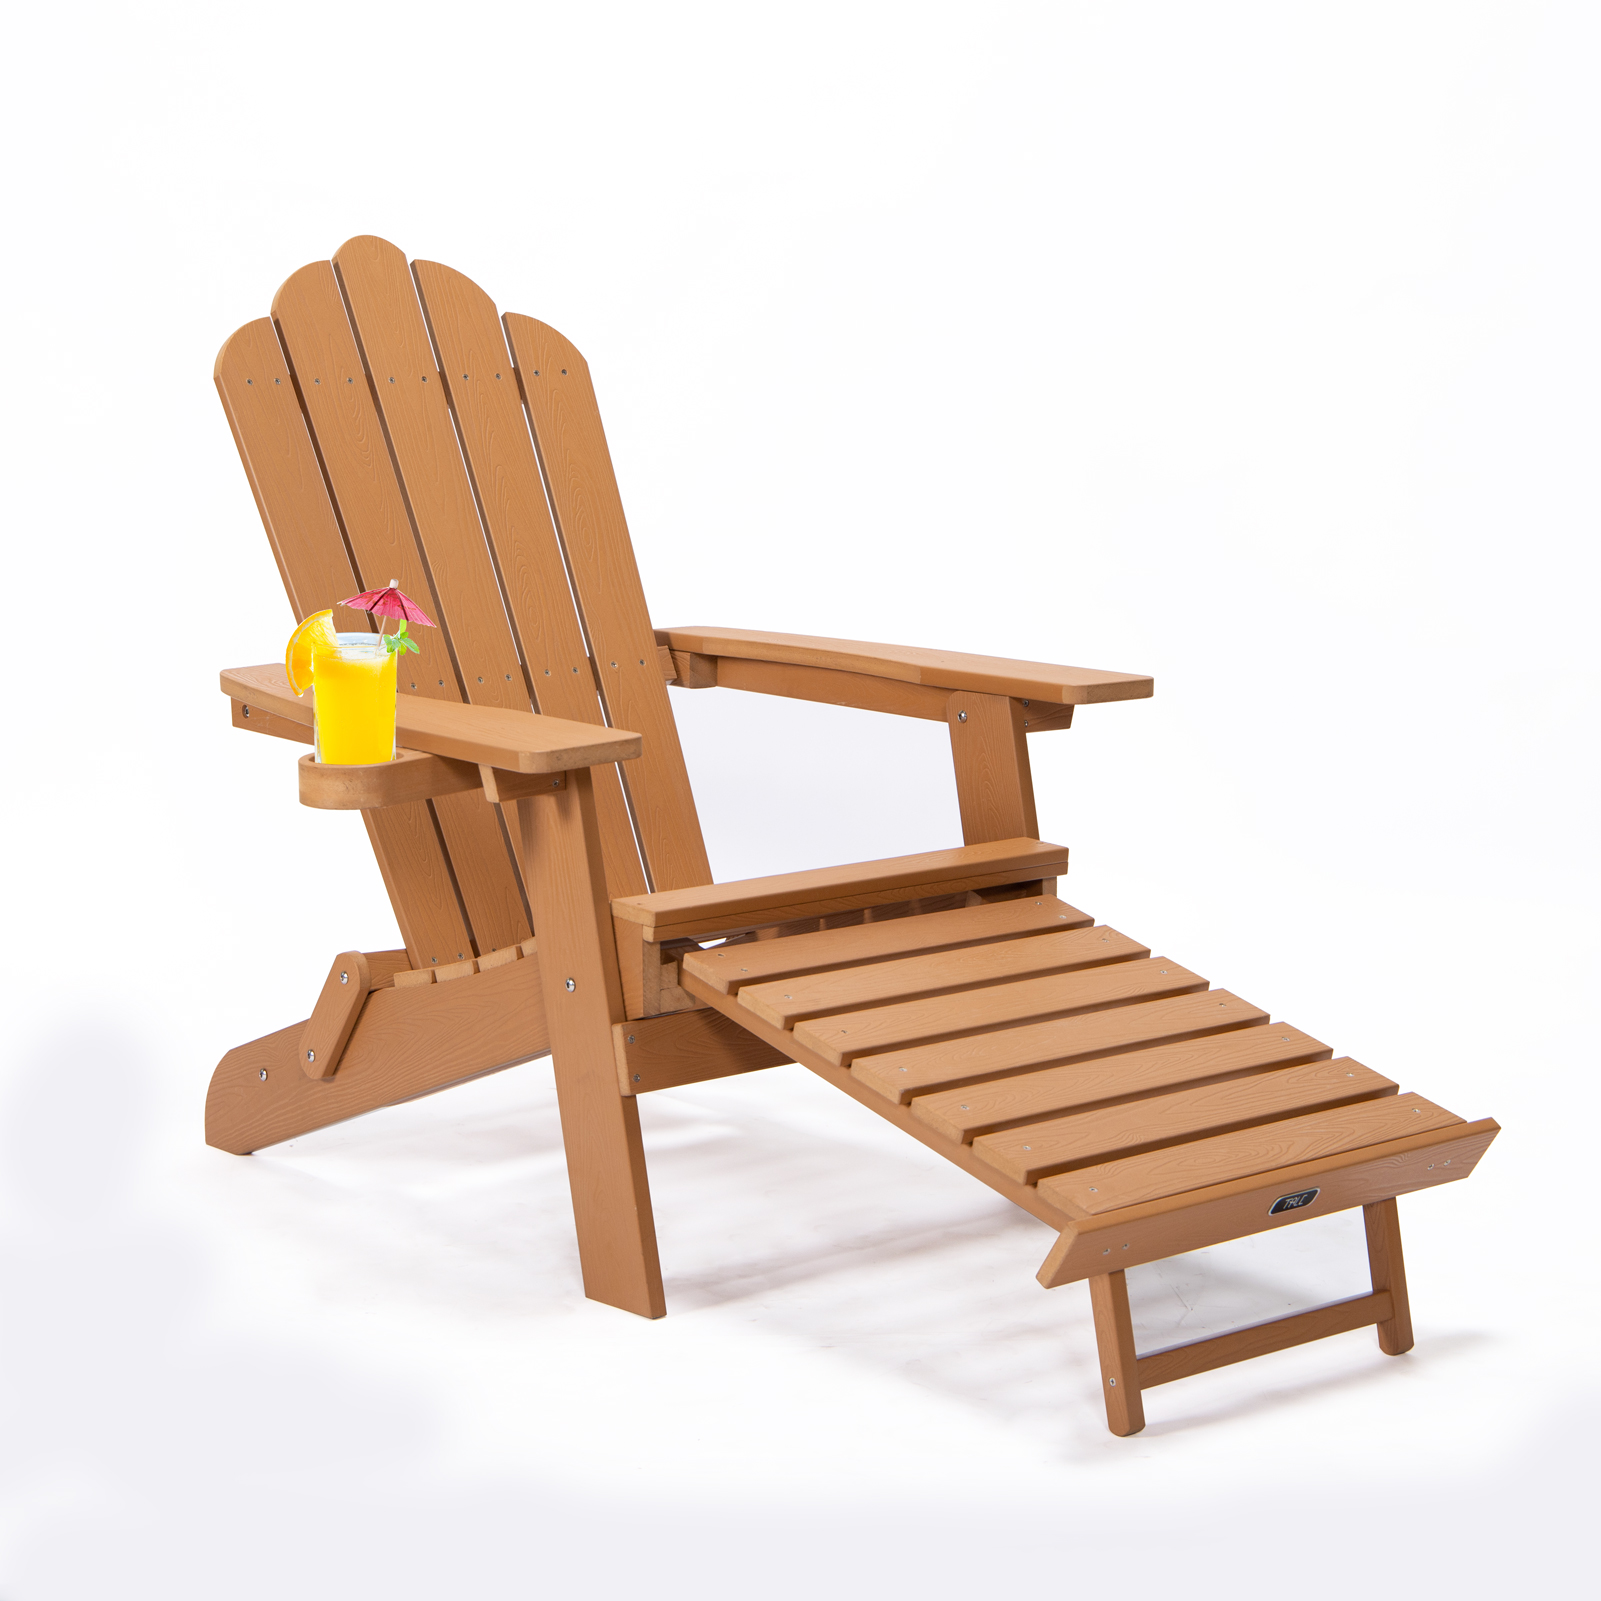 Wood Outdoor Adirondack Chair, Adirondack Chairs Folding Outdoor Patio Chairs, Wooden Accent Lounge Furniture for Yard, Patio - image 1 of 9